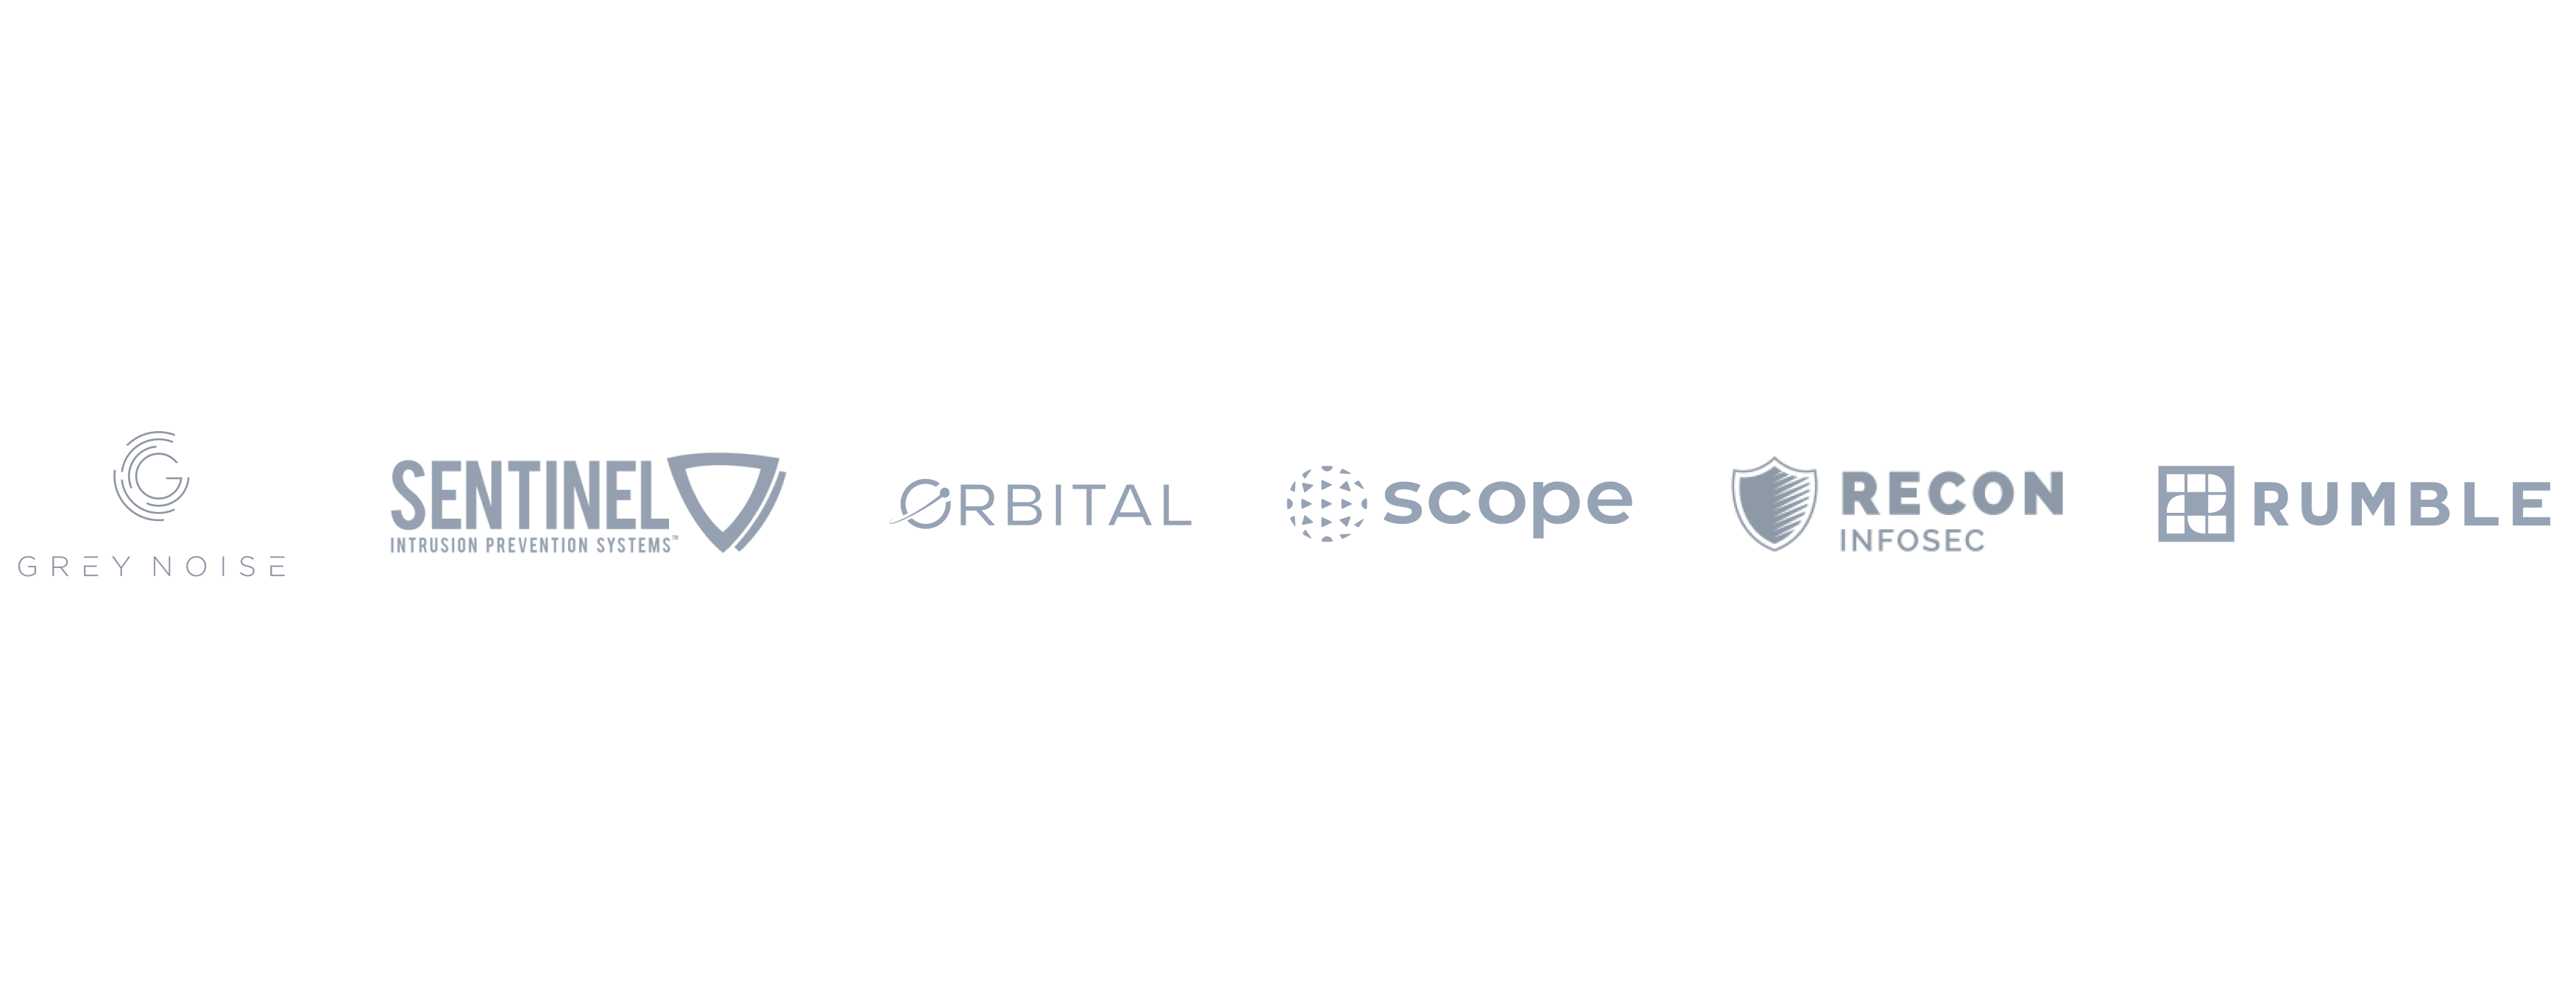 A list of client logos featuring; Greynoise, Sentinel, Orbital, Scope Security, Recon Infosec, and Rumble.